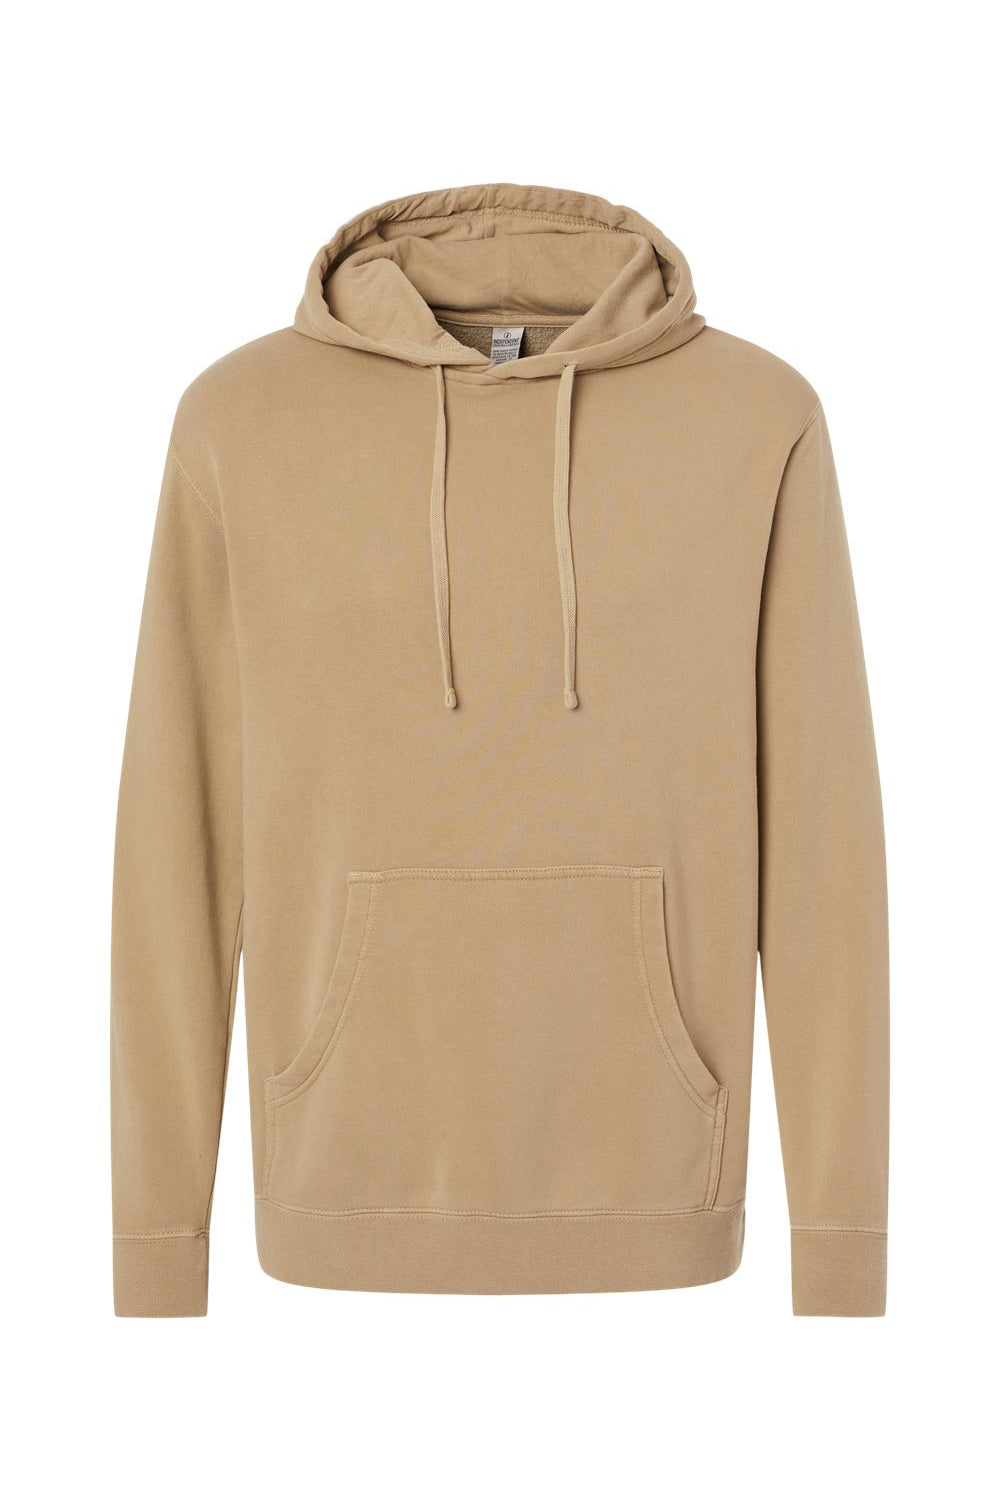 Independent Trading Co. PRM4500 Mens Pigment Dyed Hooded Sweatshirt Hoodie Sandstone Brown Flat Front